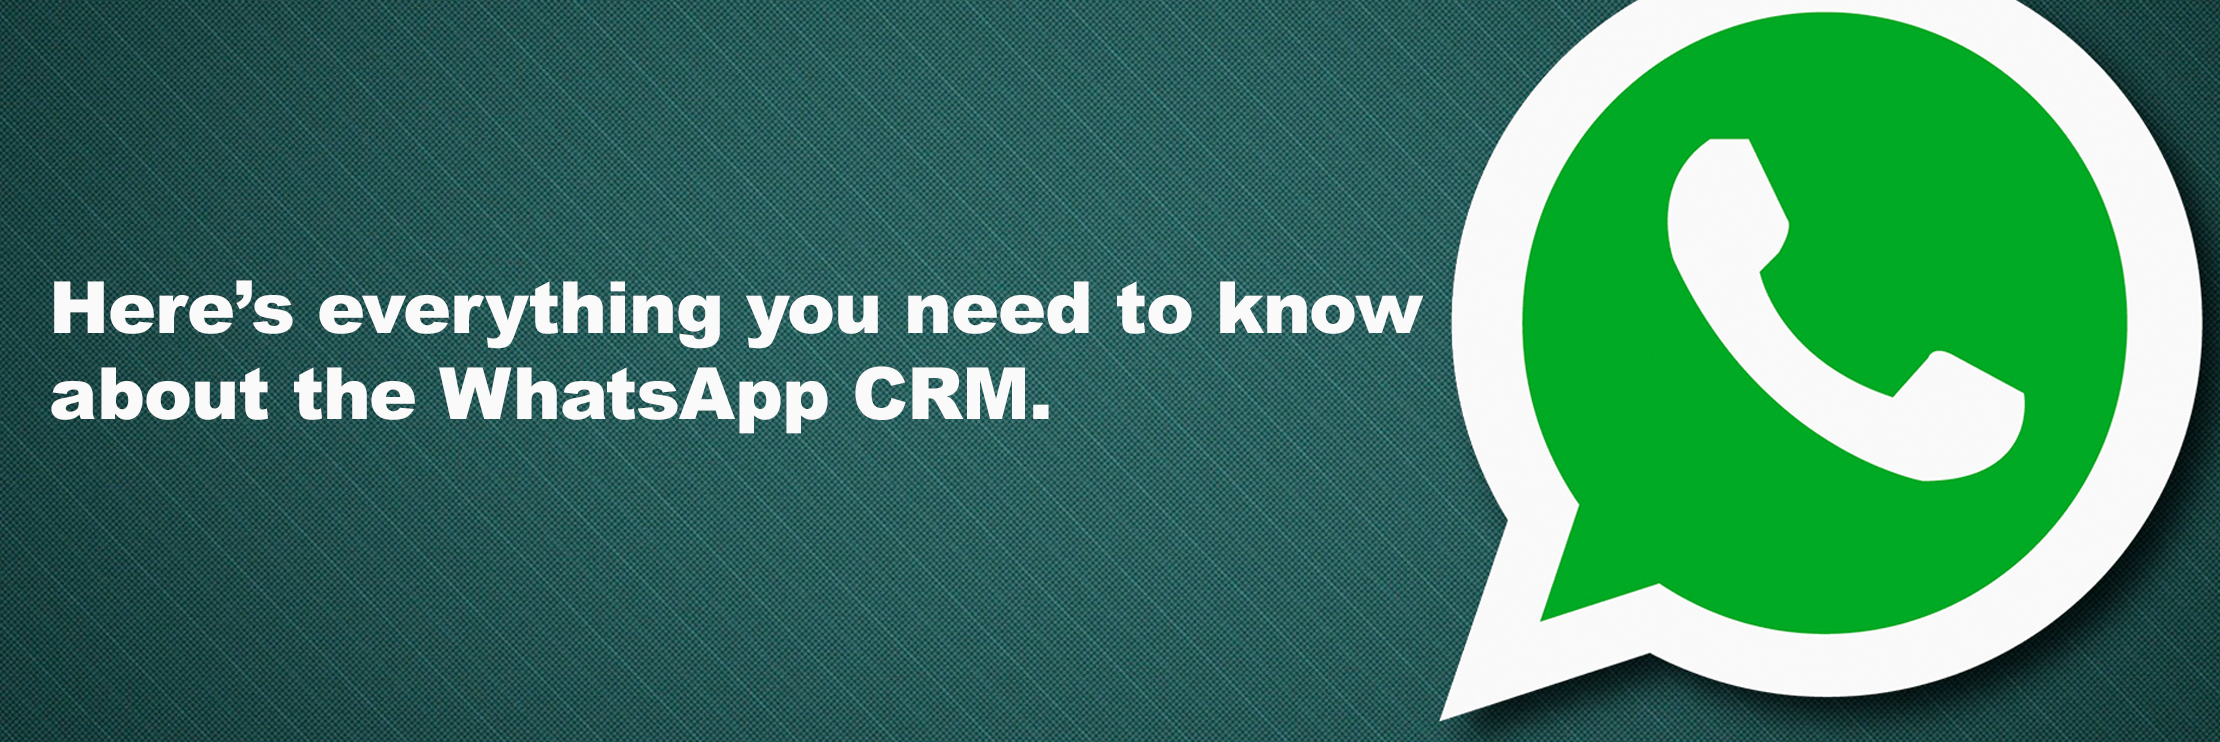 Everything About WhatsApp CRM